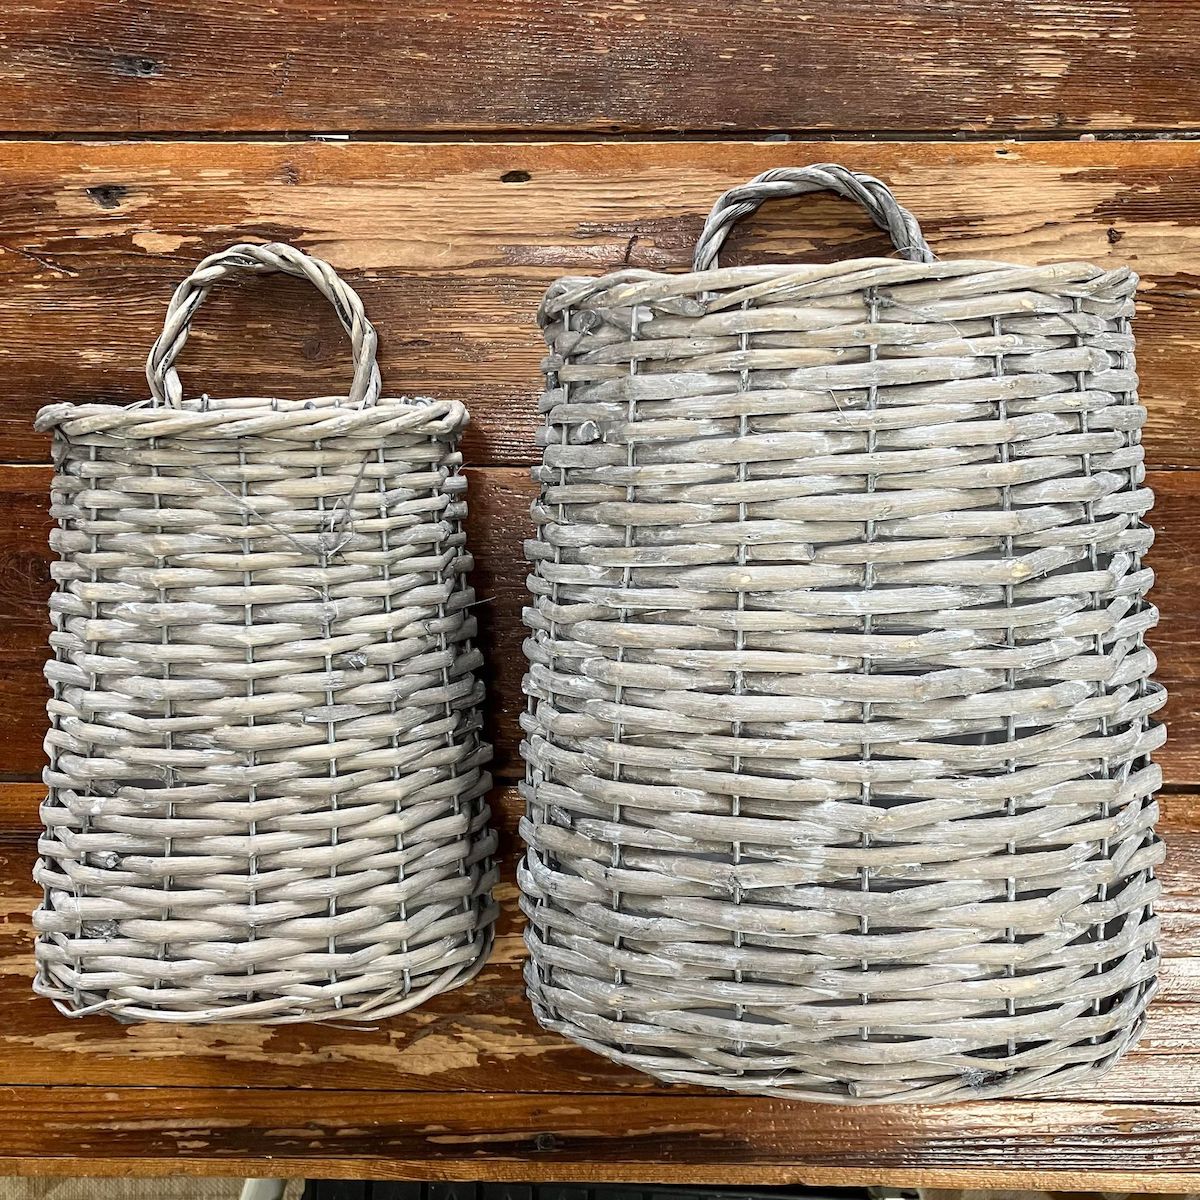 Medium and Large Woven Willow Baskets with Hanging Loops